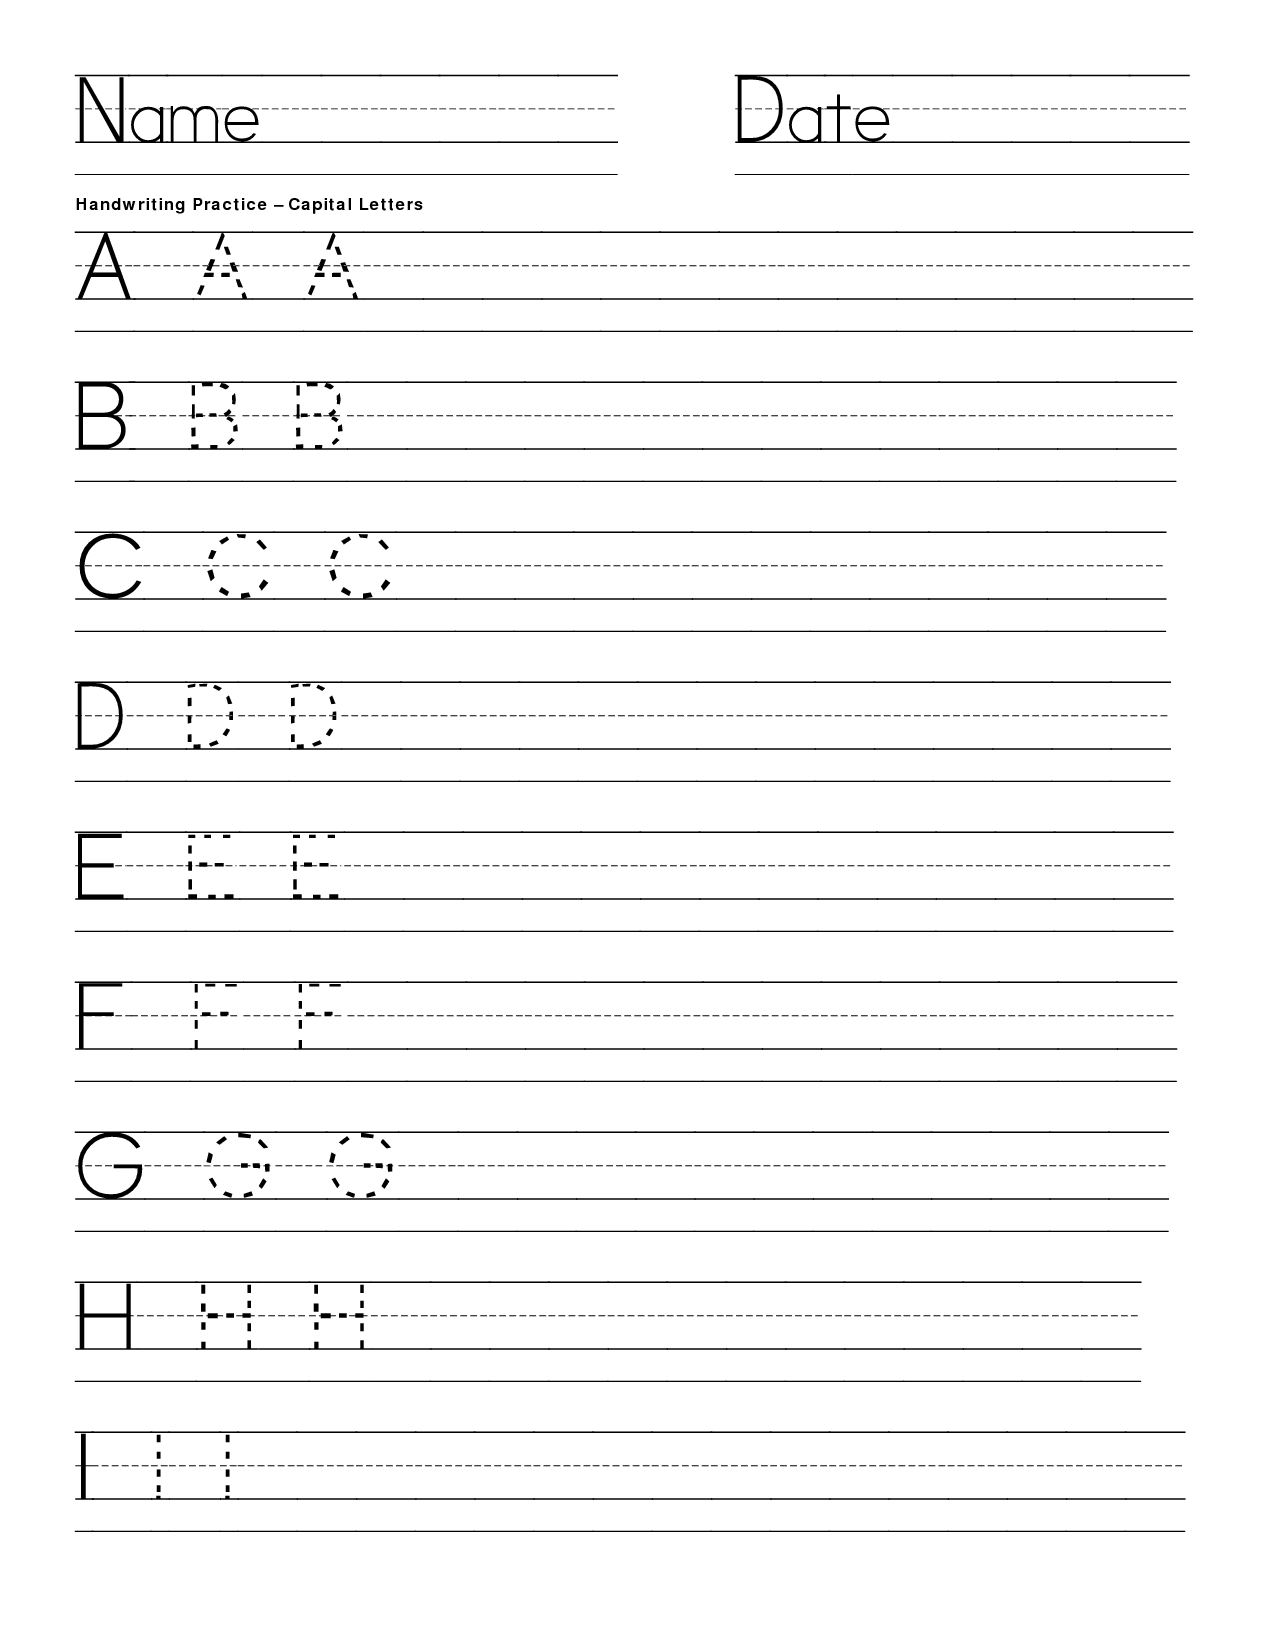 6 Best Images of Letter Writing Practice Printables ...